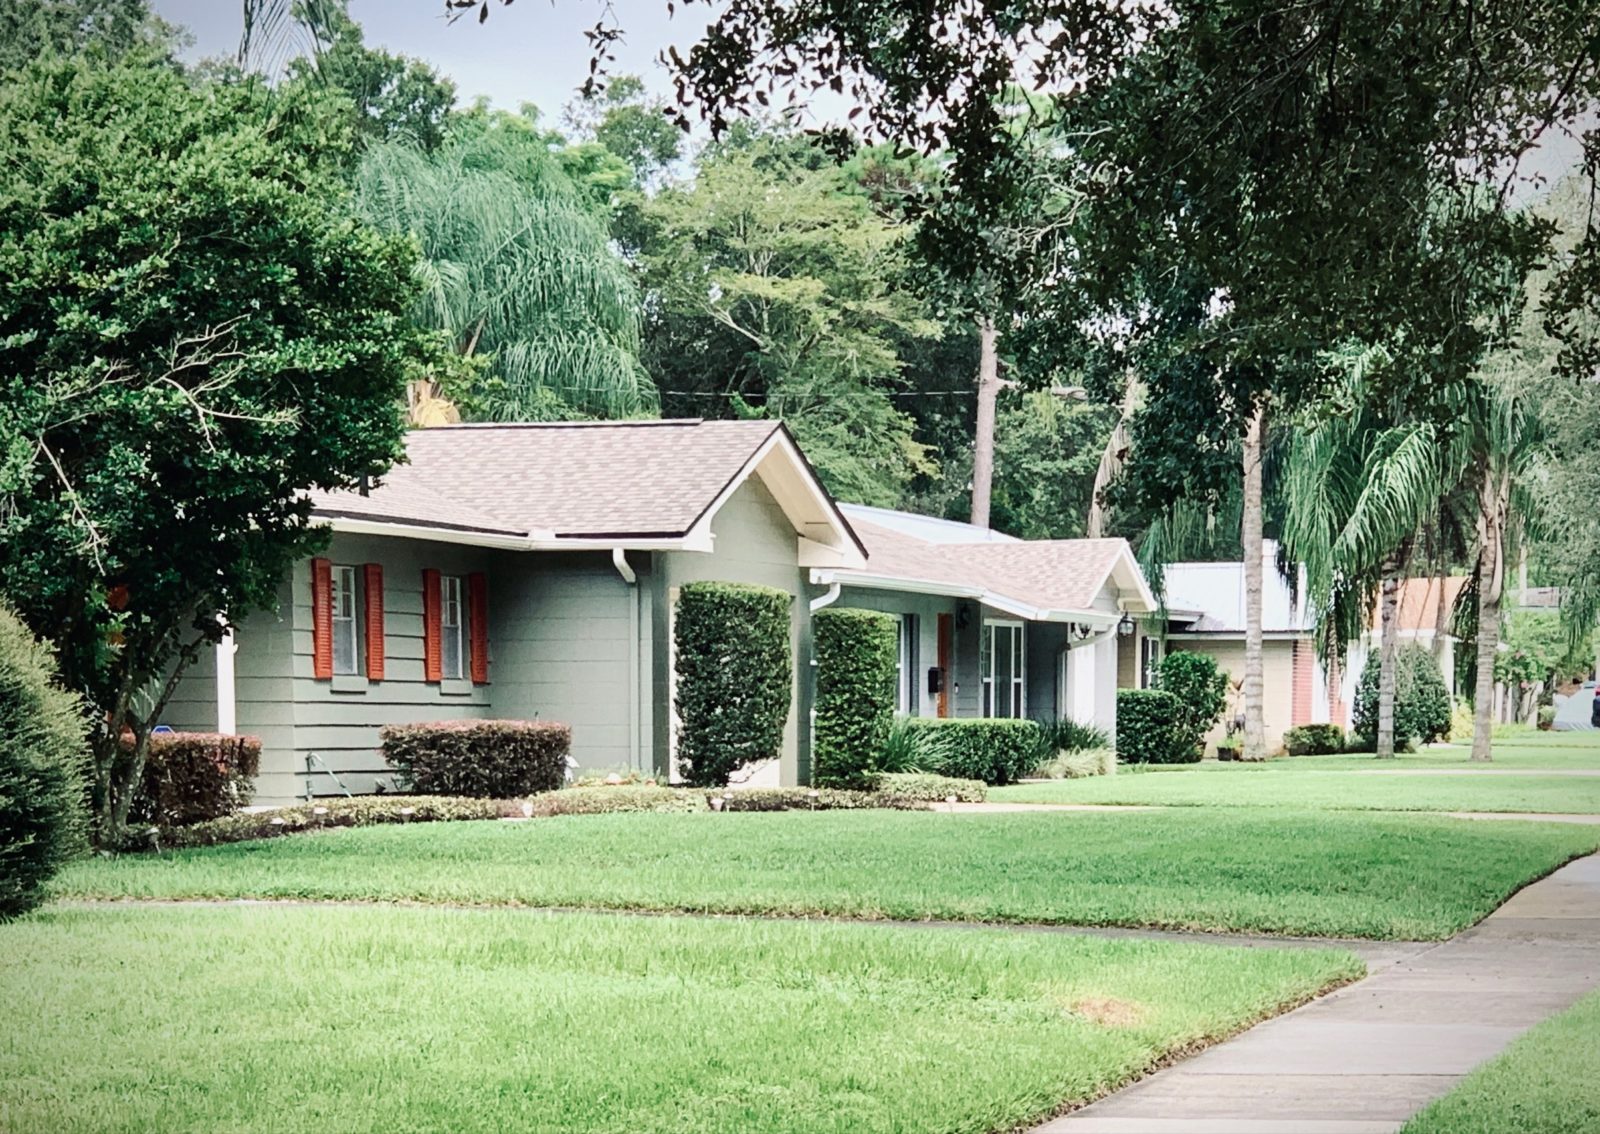 Homes in Winter Park, Fla.